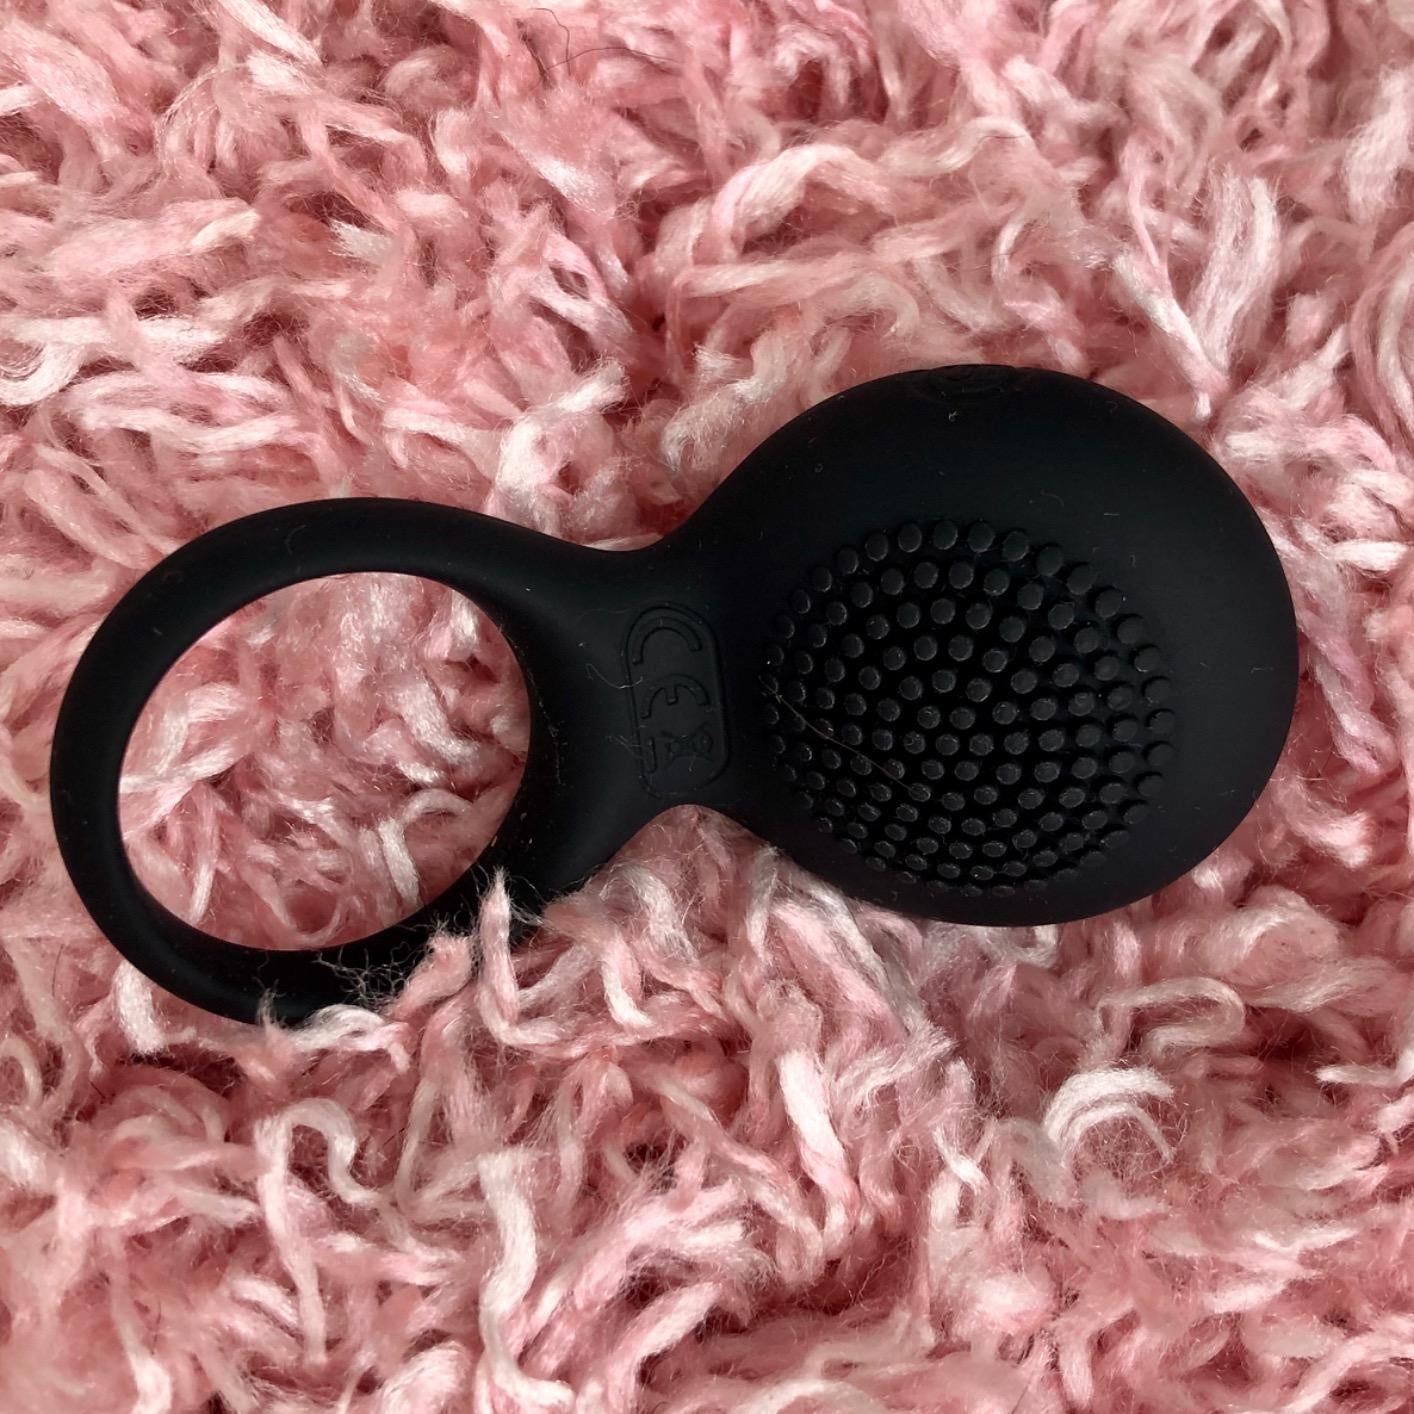 Black cock ring with vibrating textured pad on plush rug